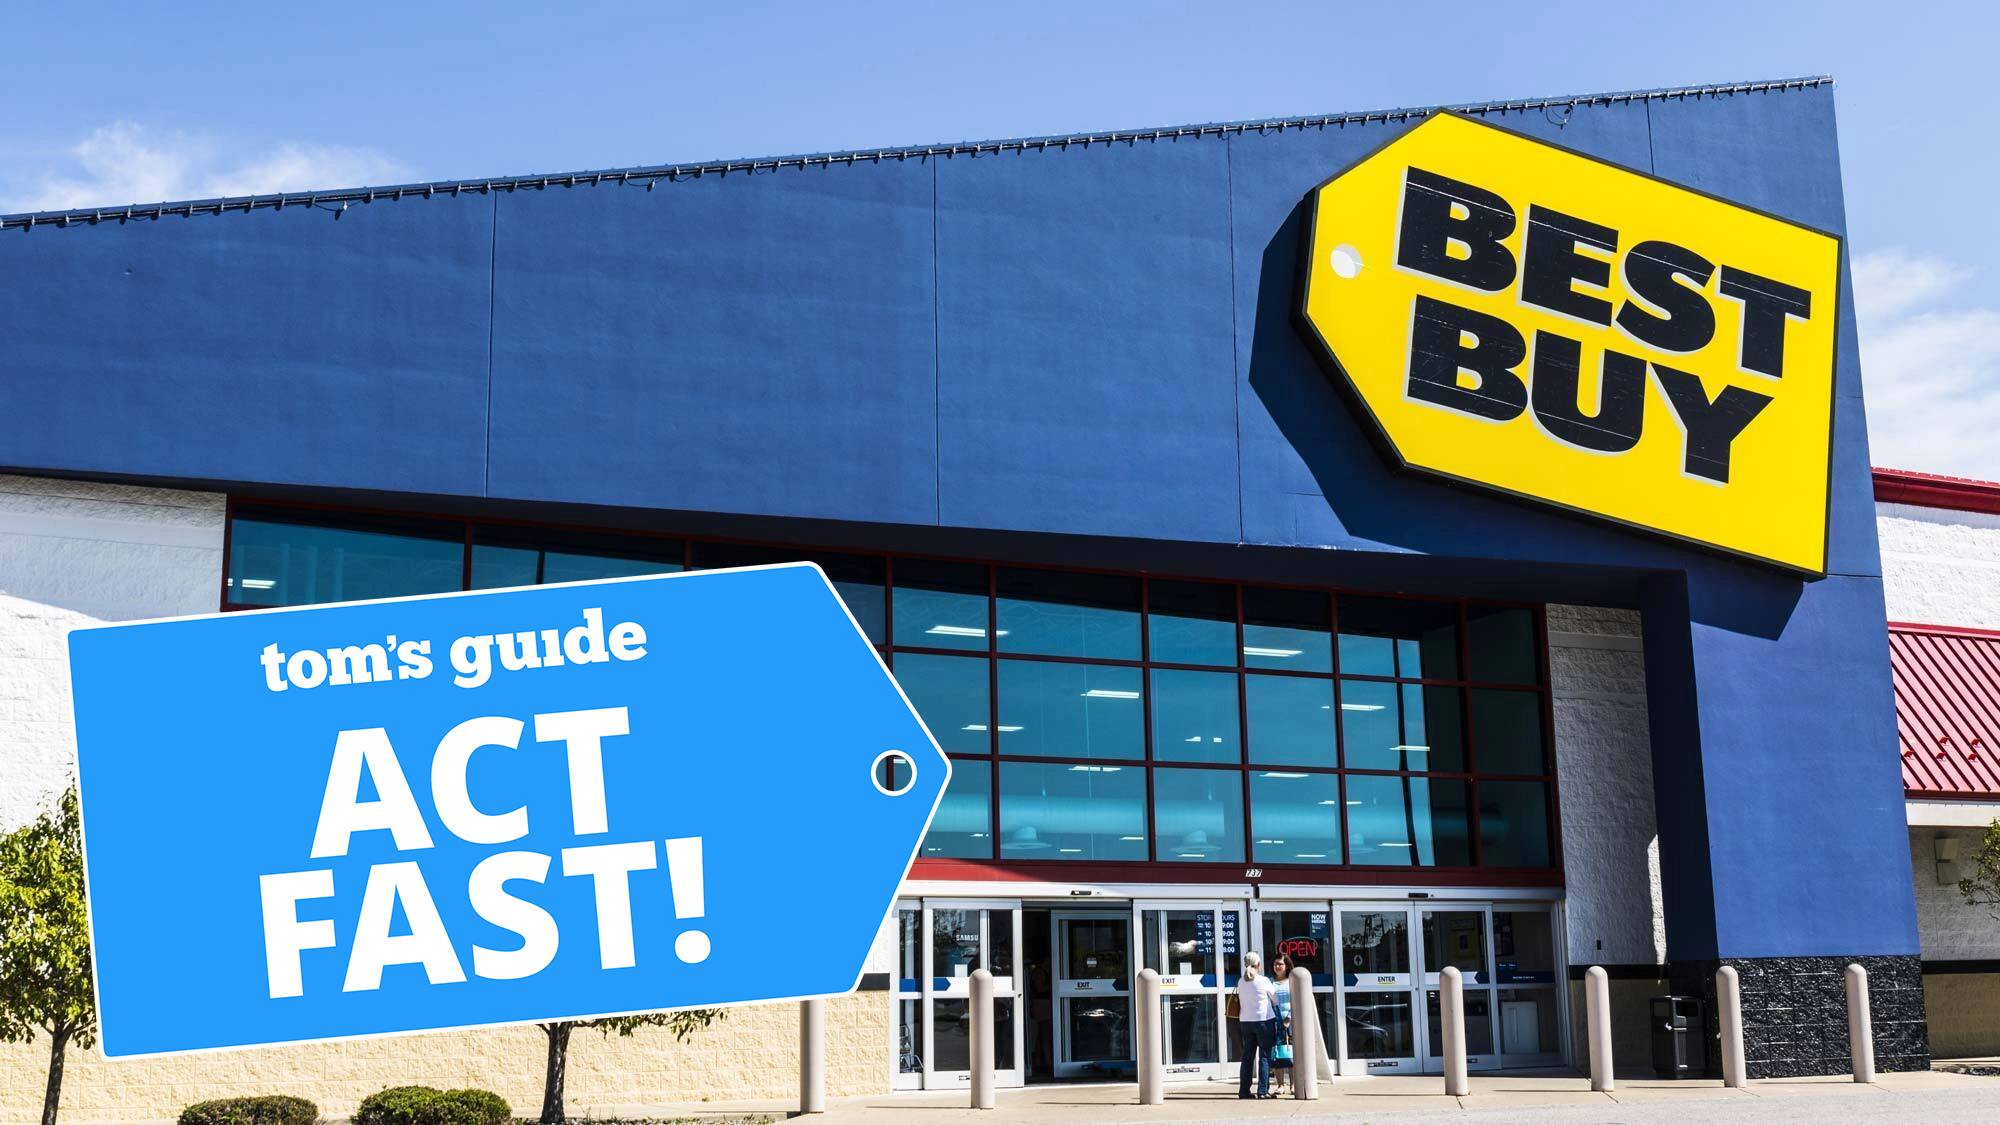 The Best Deals from Best Buy (Updated Daily)